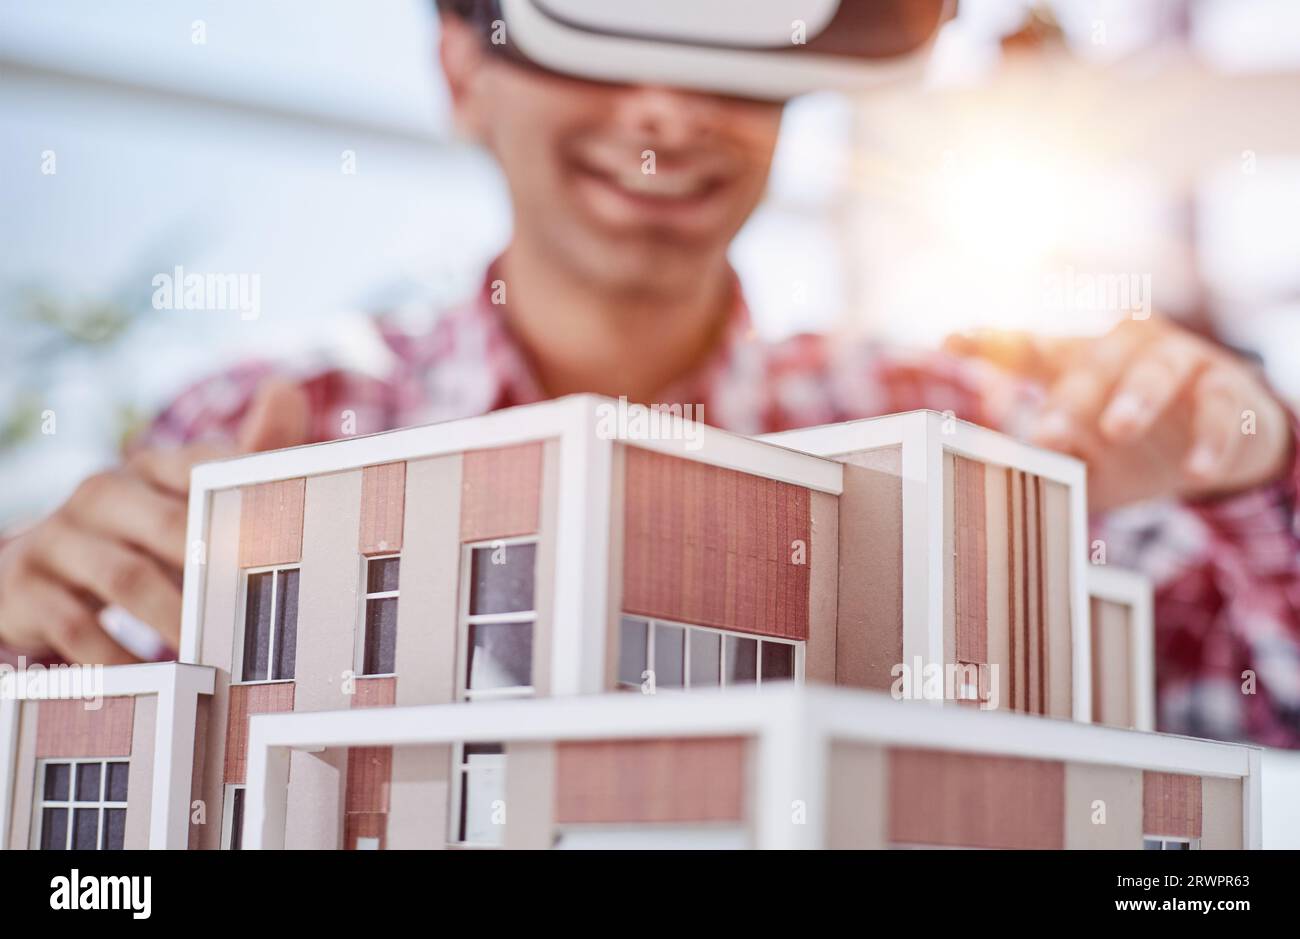 Virtual reality futuristic design technology. Architect or design engineer in VR headset for BIM technology designing a 3D model Stock Photo